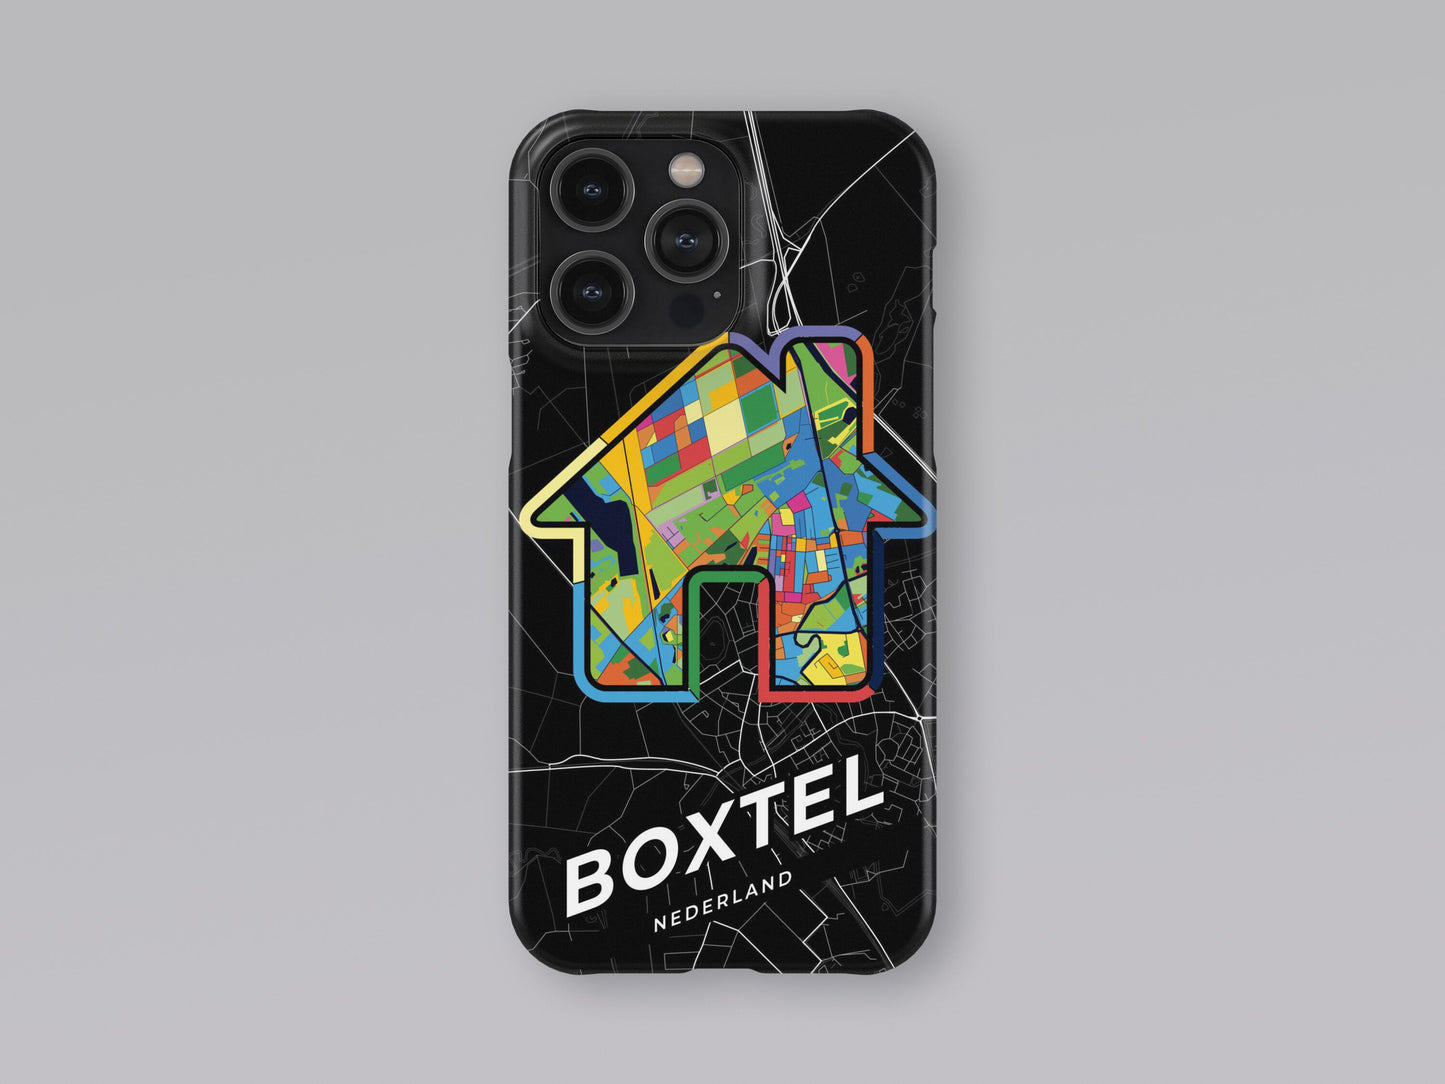 Boxtel Netherlands slim phone case with colorful icon. Birthday, wedding or housewarming gift. Couple match cases. 3